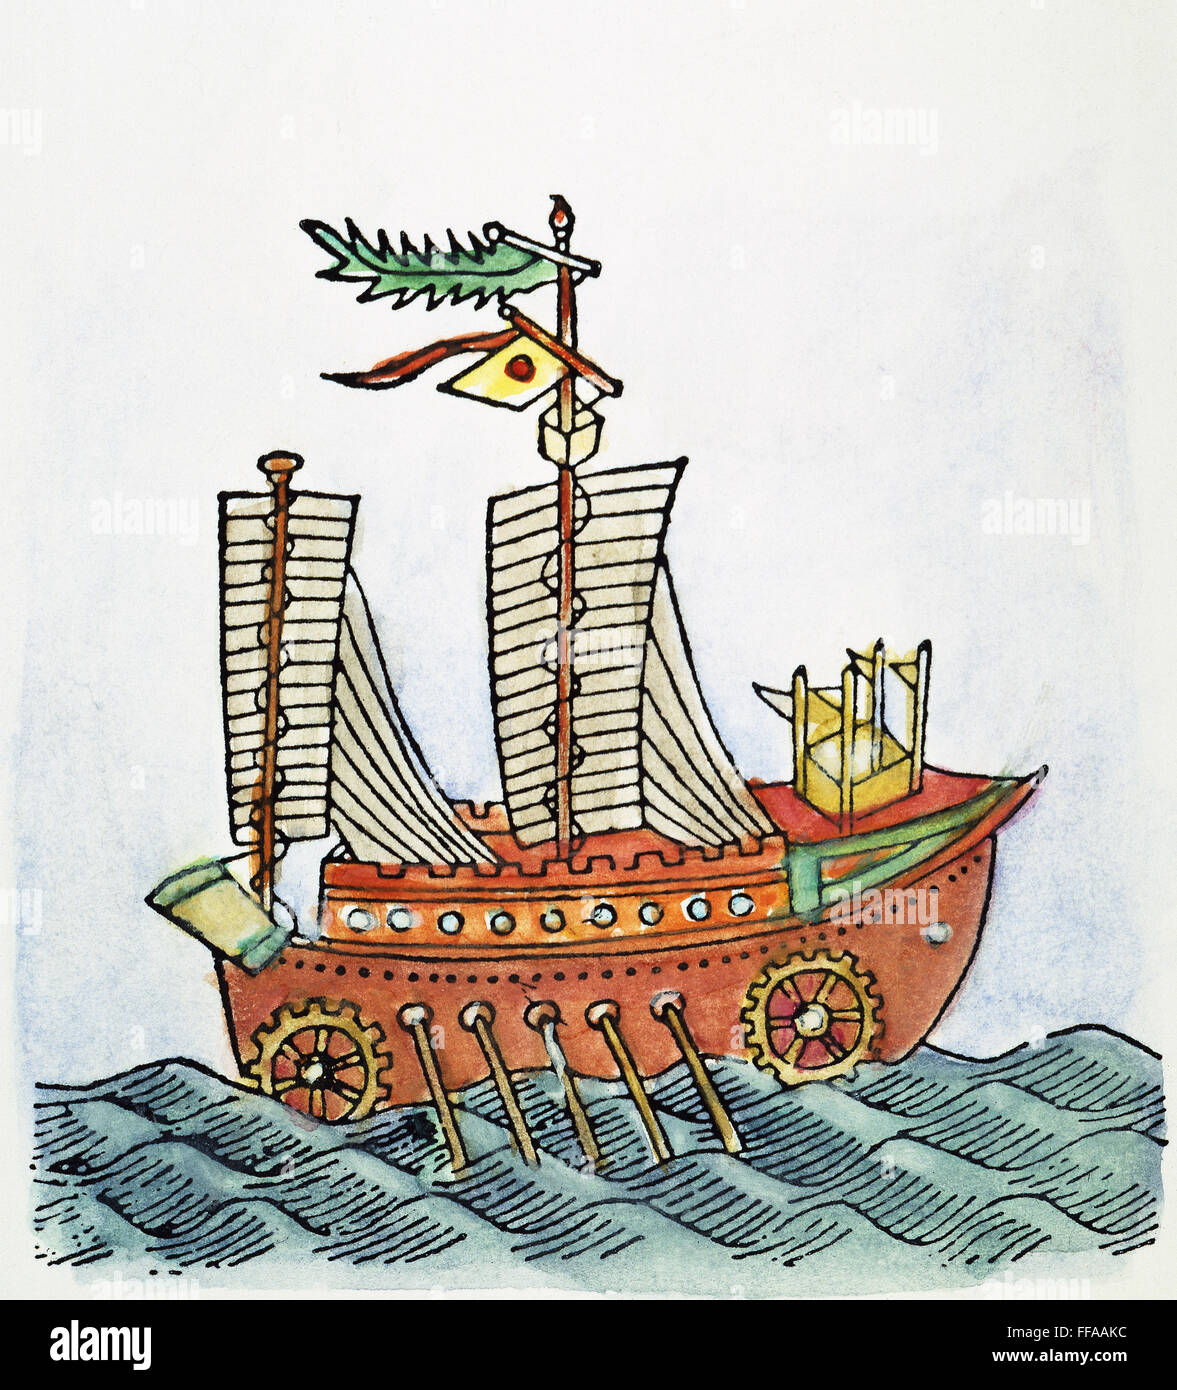 CHINESE SHIP, 12th CENTURY./nA ship outfitted with sails, oars, and wheels for passage on land. Chinese woodcut, 12th century. Stock Photo